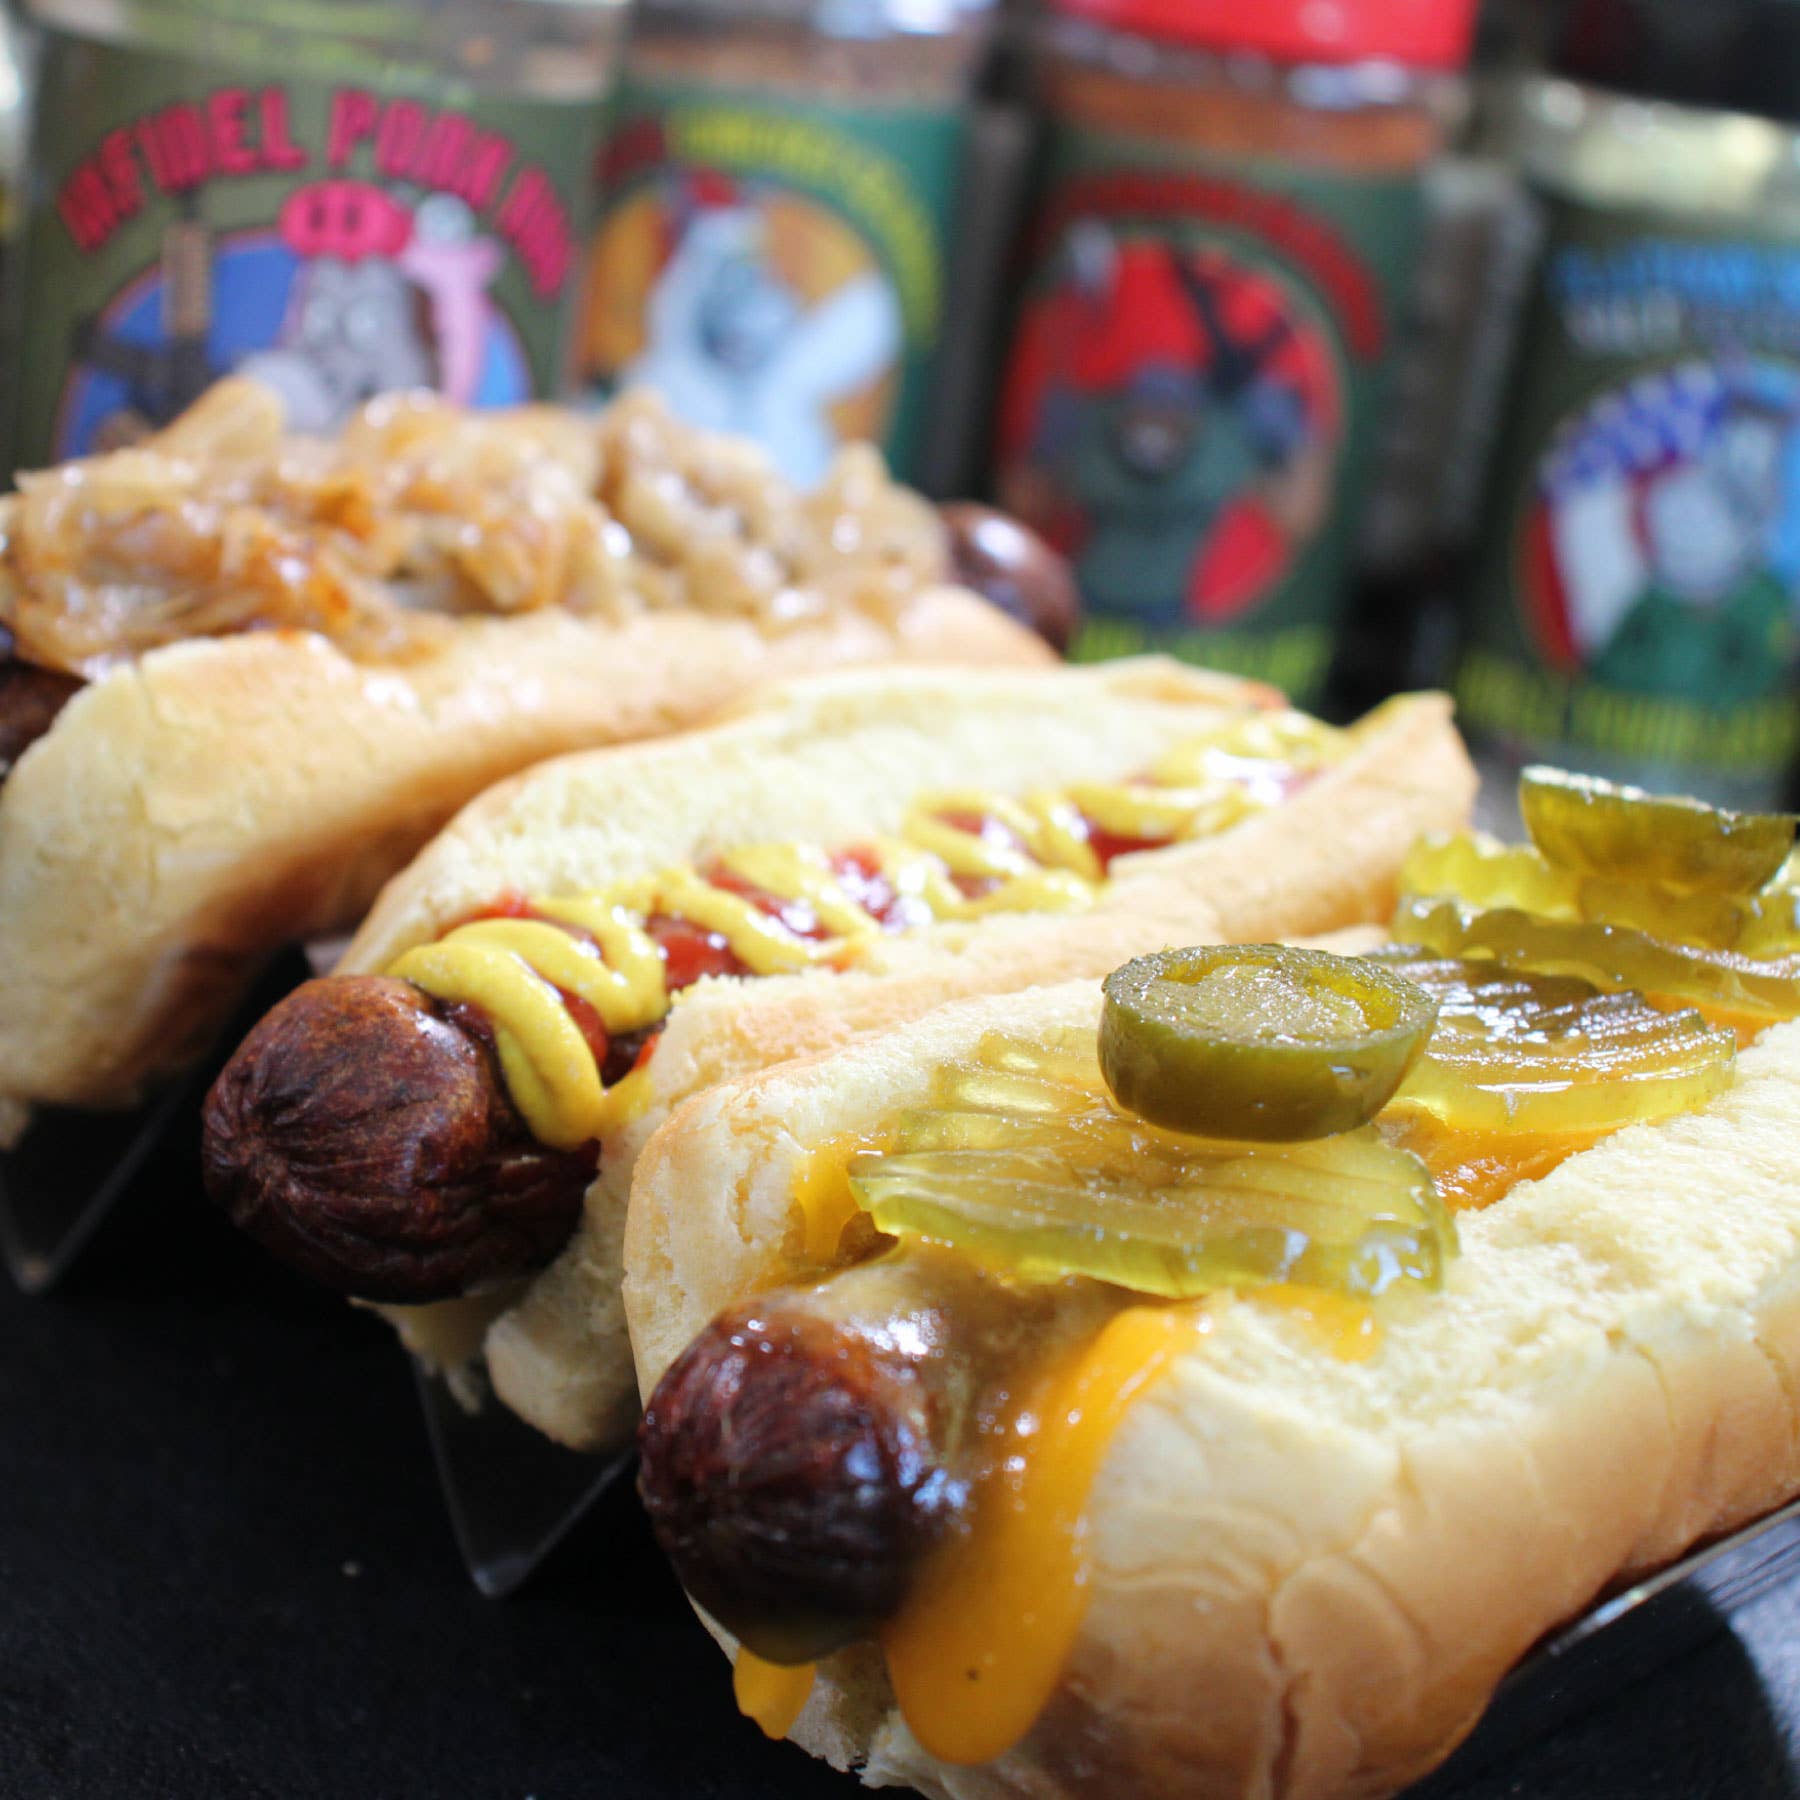 Donkey Dongs Sweet Fire Pickles - Jalapeno Pickle, Condiment